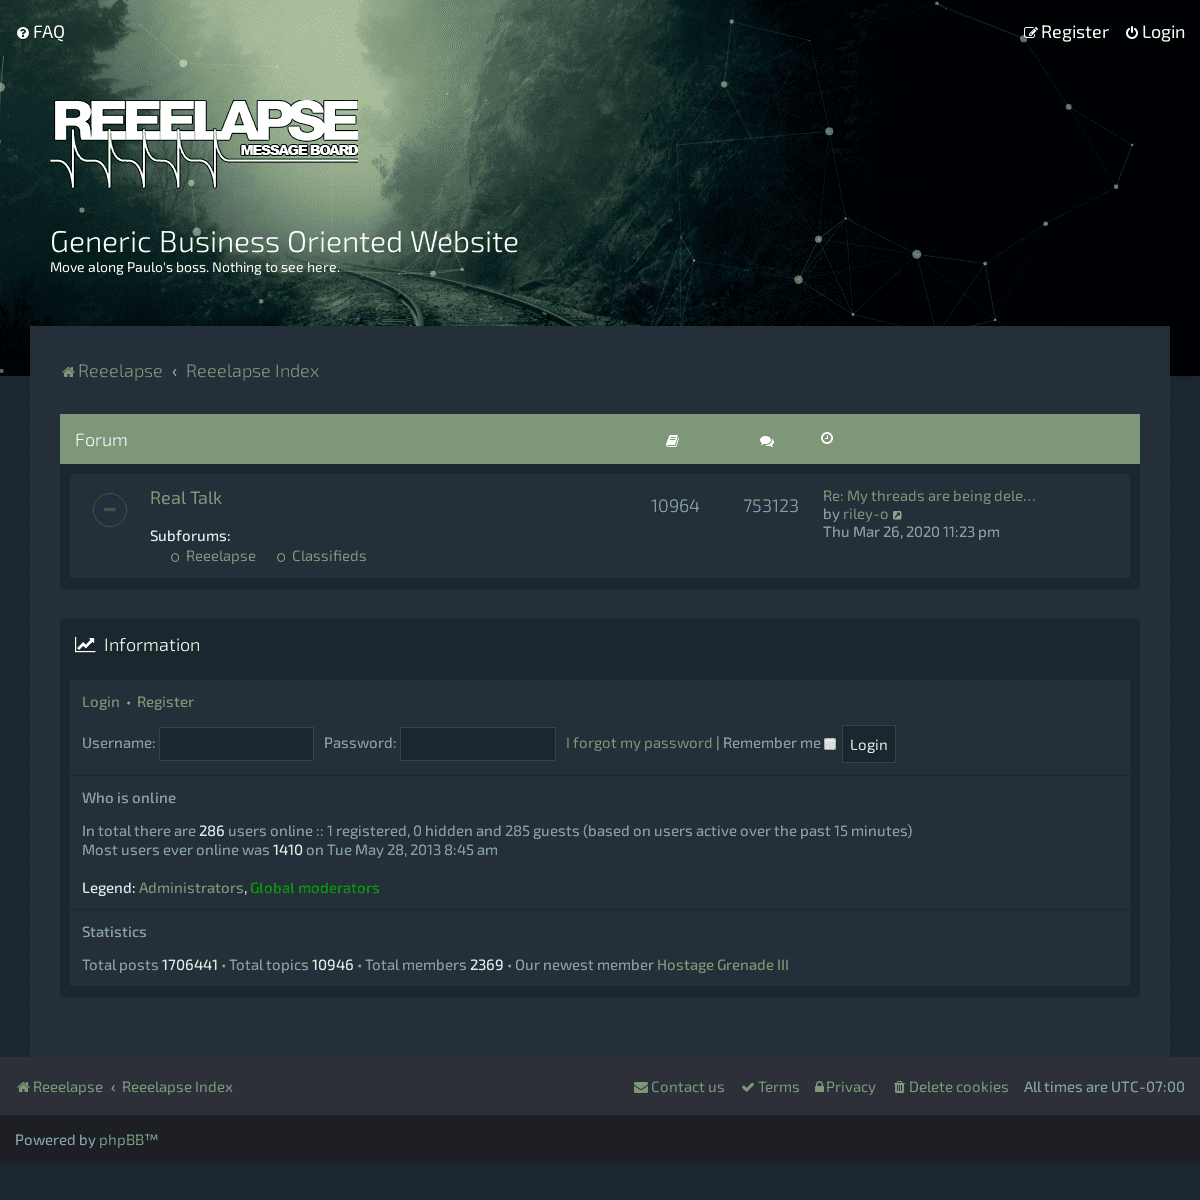 A complete backup of reeelapse.com